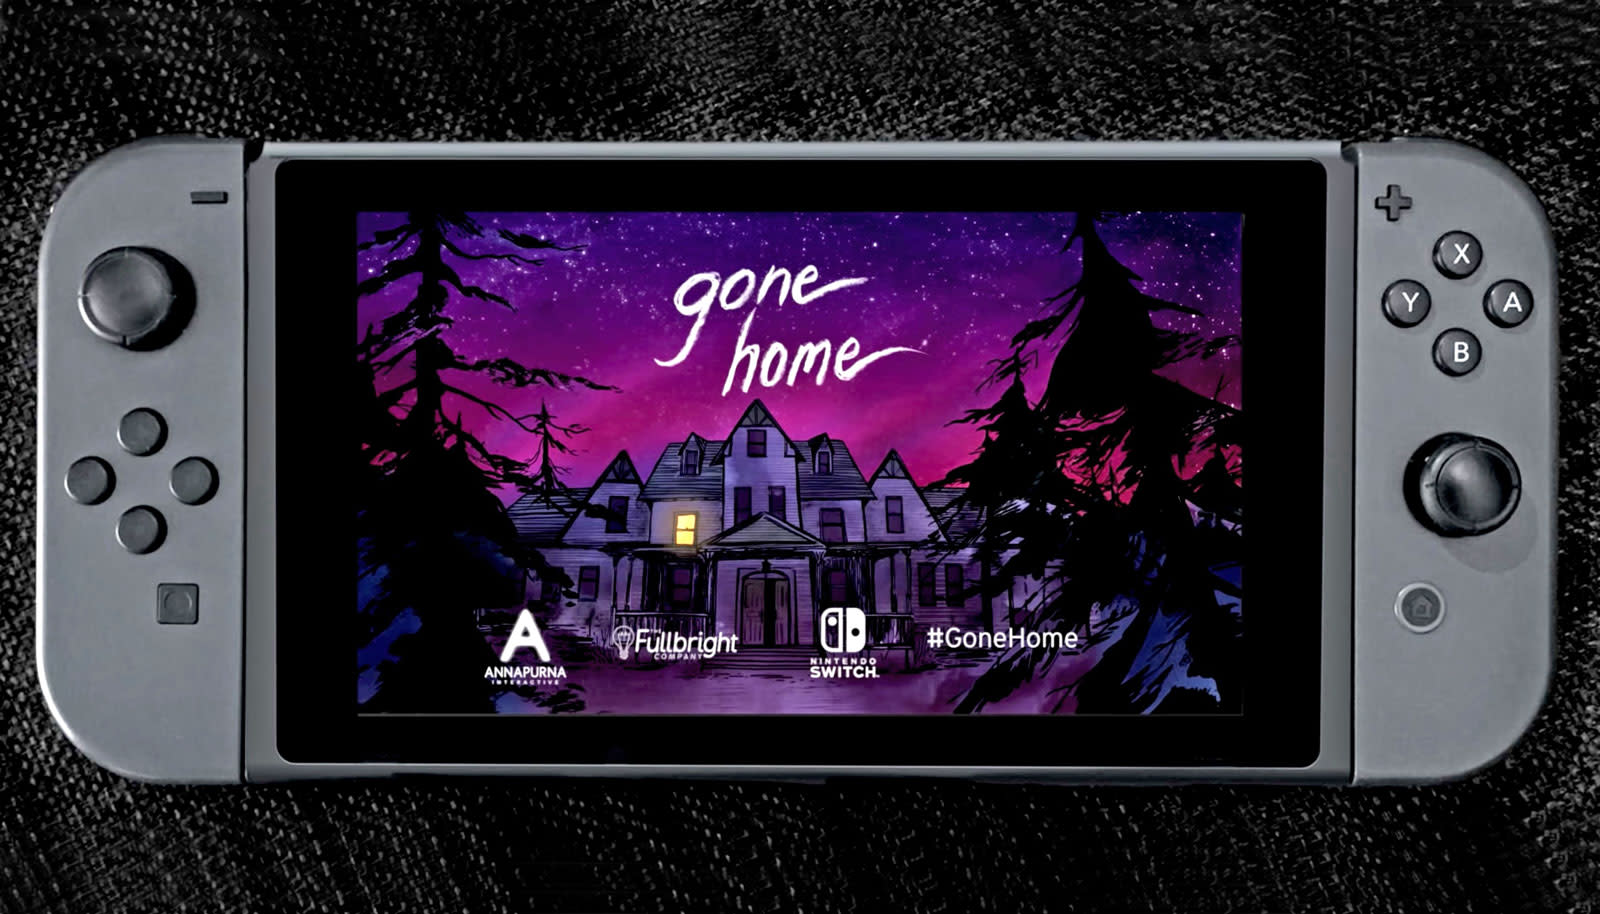 Go home game. Gone Home игра ps4. Nintendo Switch дом. Gone Home - Console Edition. Fullbright (Company) игры.